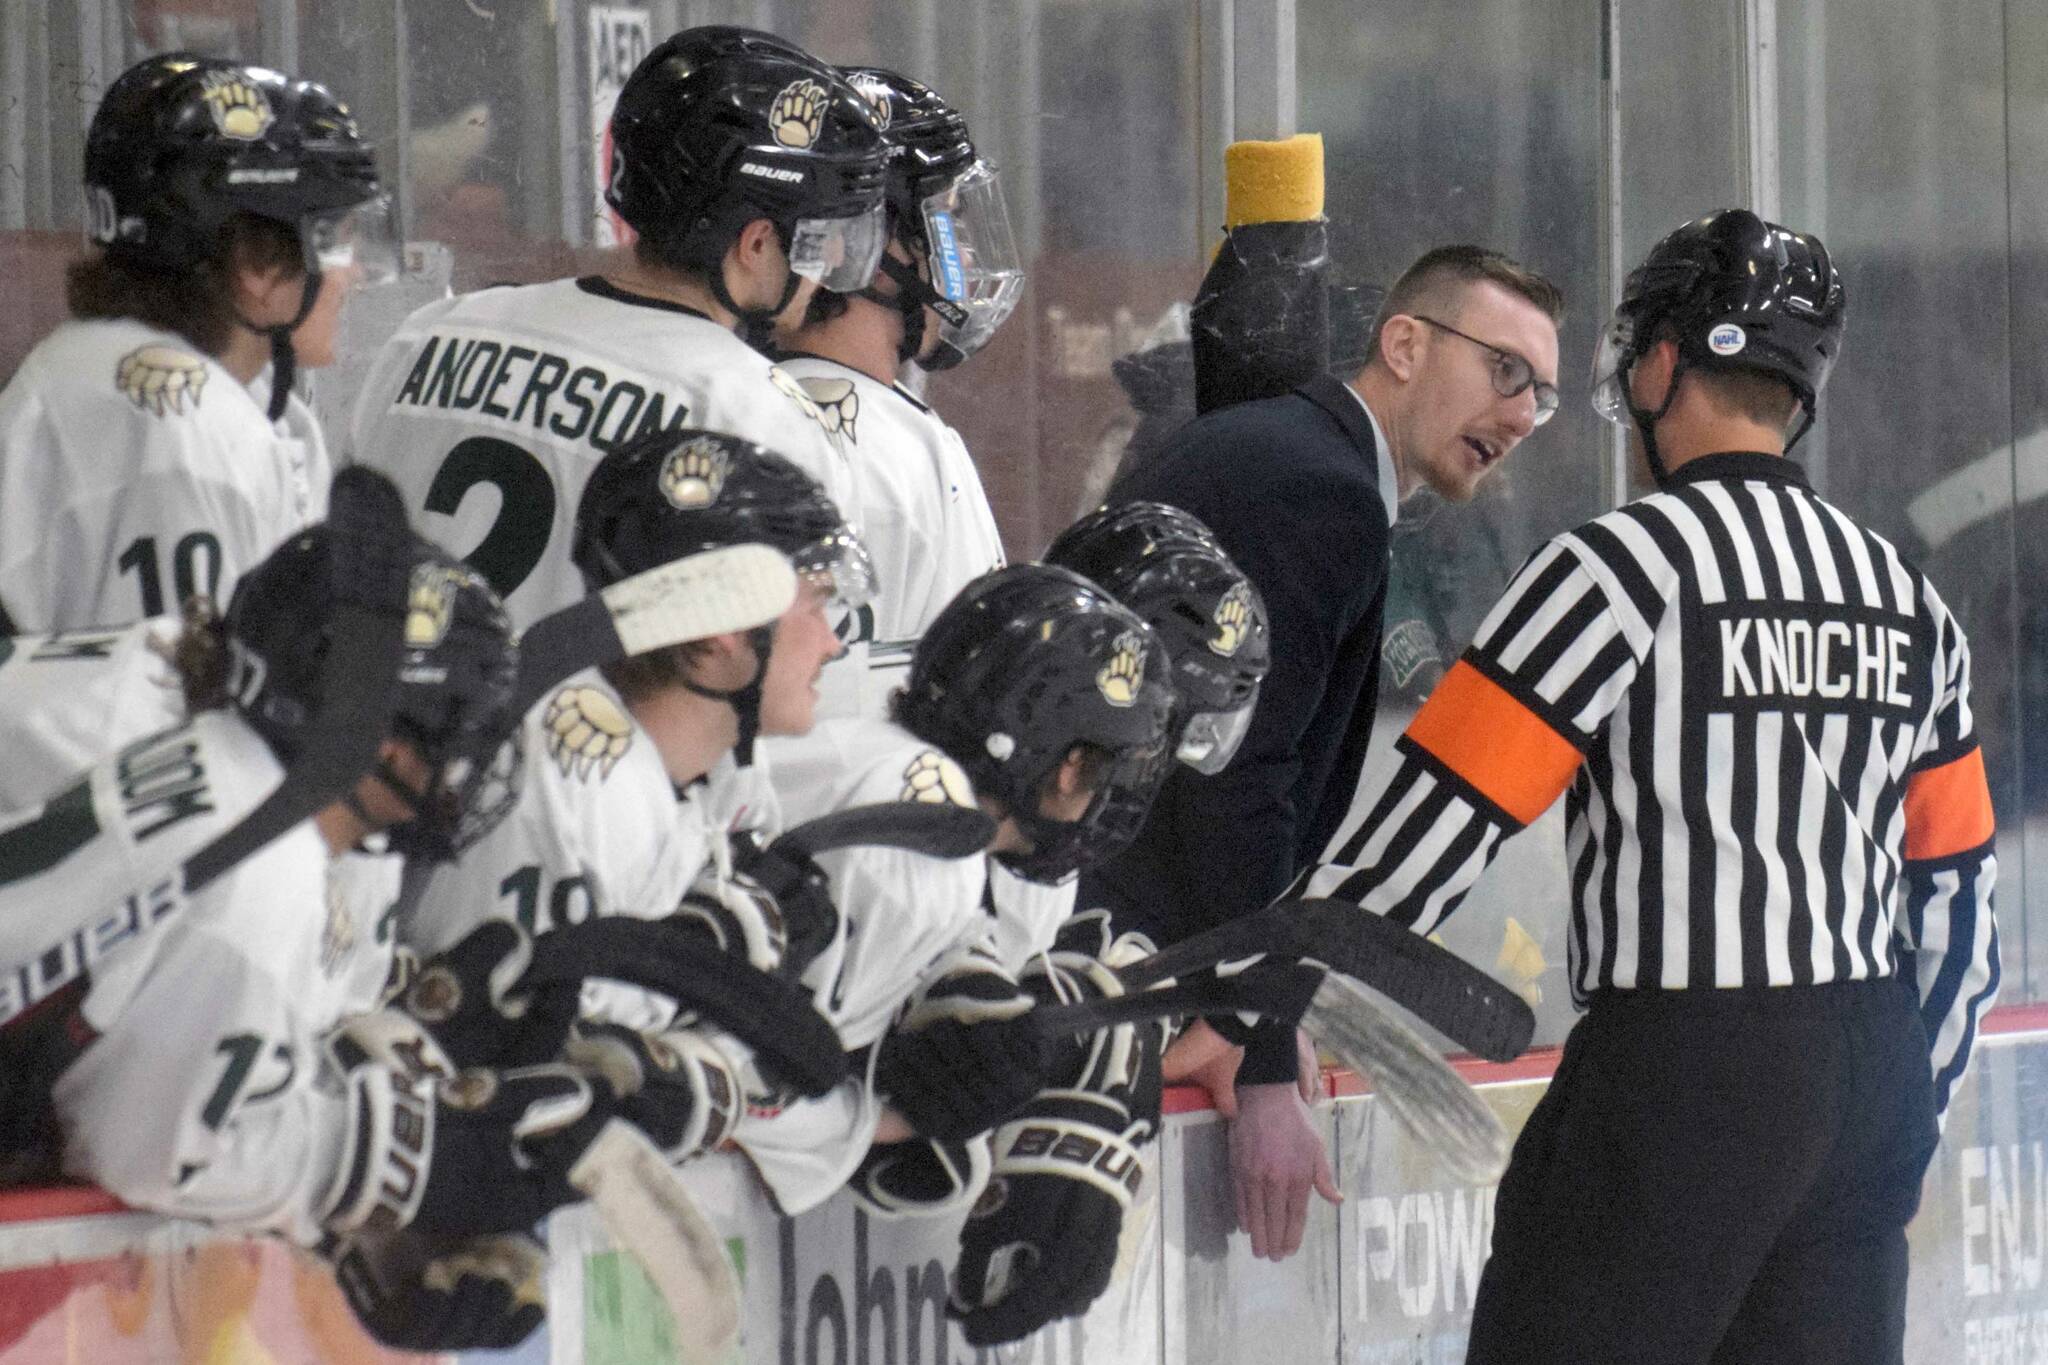 Taylor Shaw coaches against the Minnesota Magicians on Saturday, April 9, 2022, at the Soldotna Regional Sports Complex in Soldotna, Alaska. Shaw was elevated from interim head coach to head coach by the Kenai River Brown Bears on Thursday, April 28, 2022. (Photo by Jeff Helminiak/Peninsula Clarion)